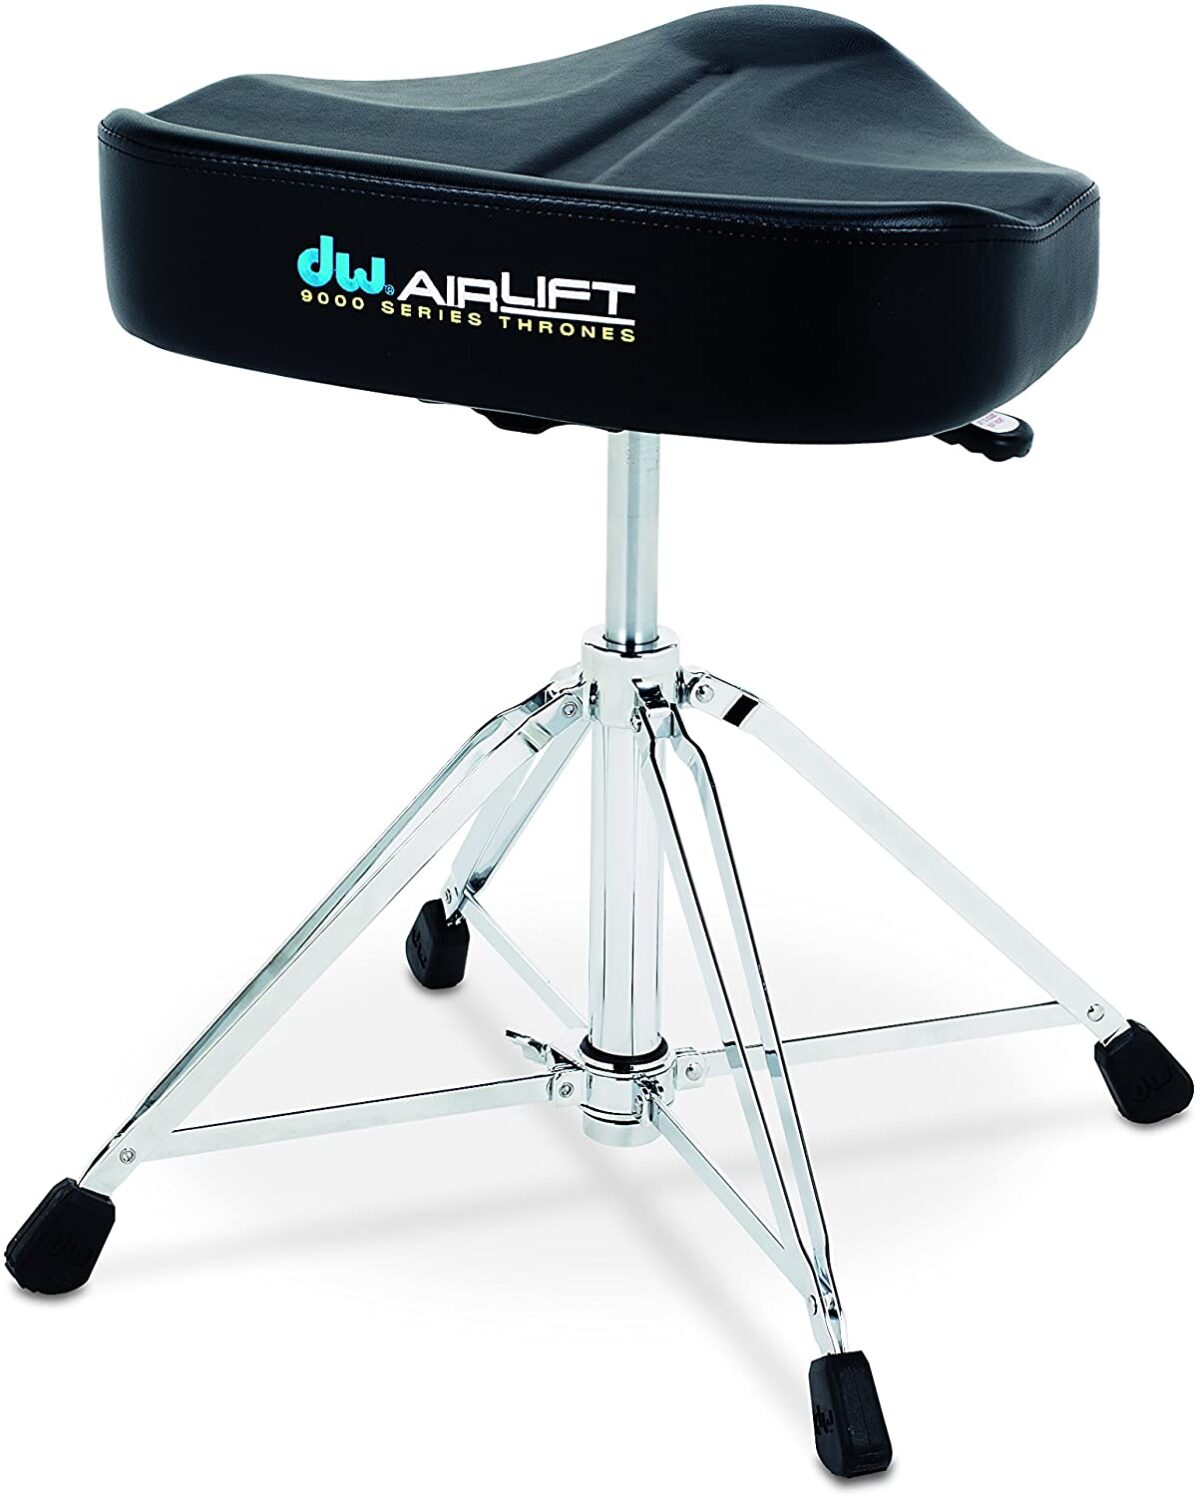 Get the Best Drum Throne for Bad Back and Play without Backaches